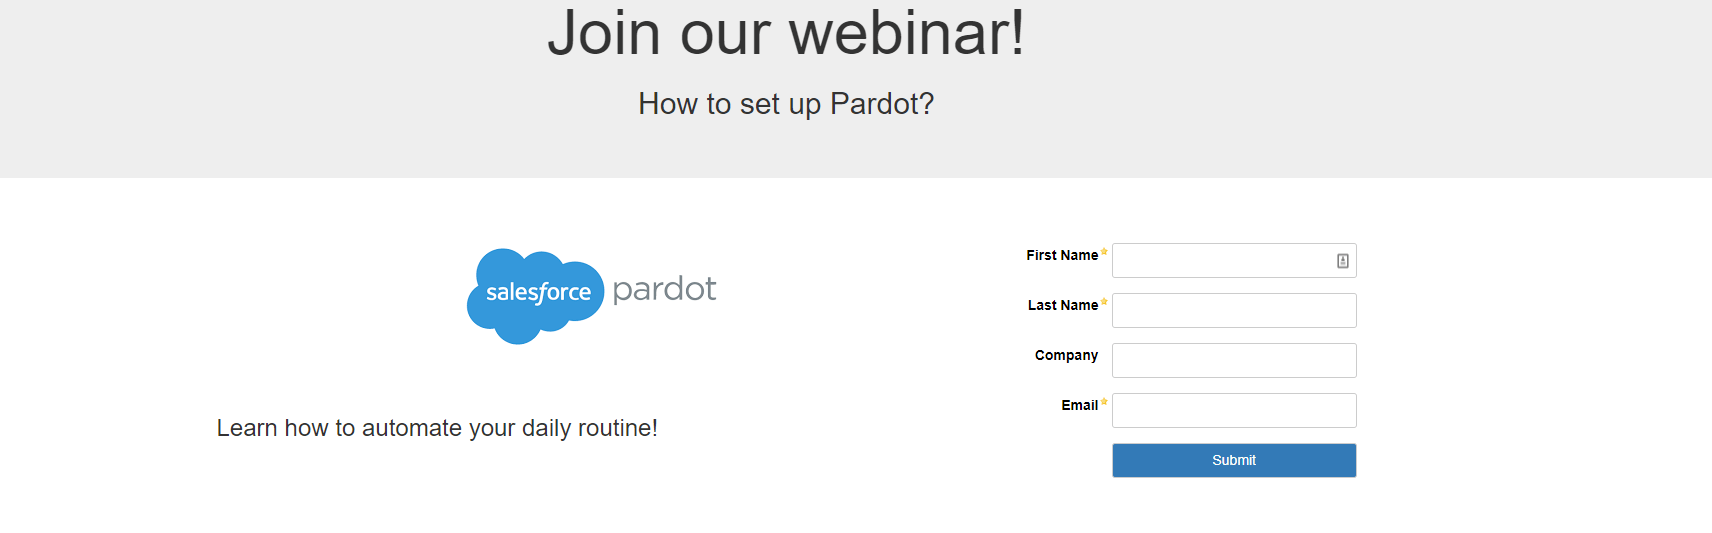 Screenshot of Landing Page implemented by Pardot